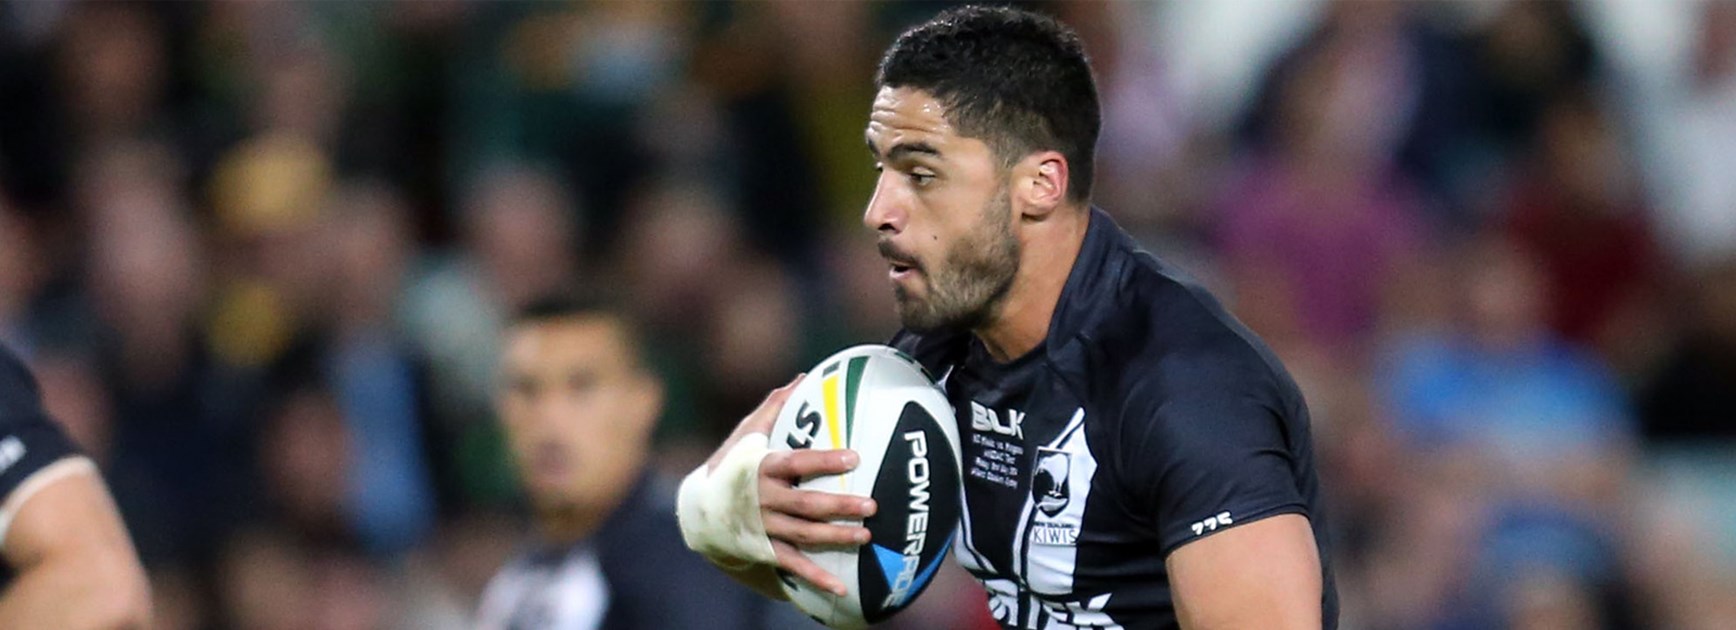 Star Kiwis prop Jesse Bromwich grabbed a try during New Zealand's win over Leeds Rhinos.